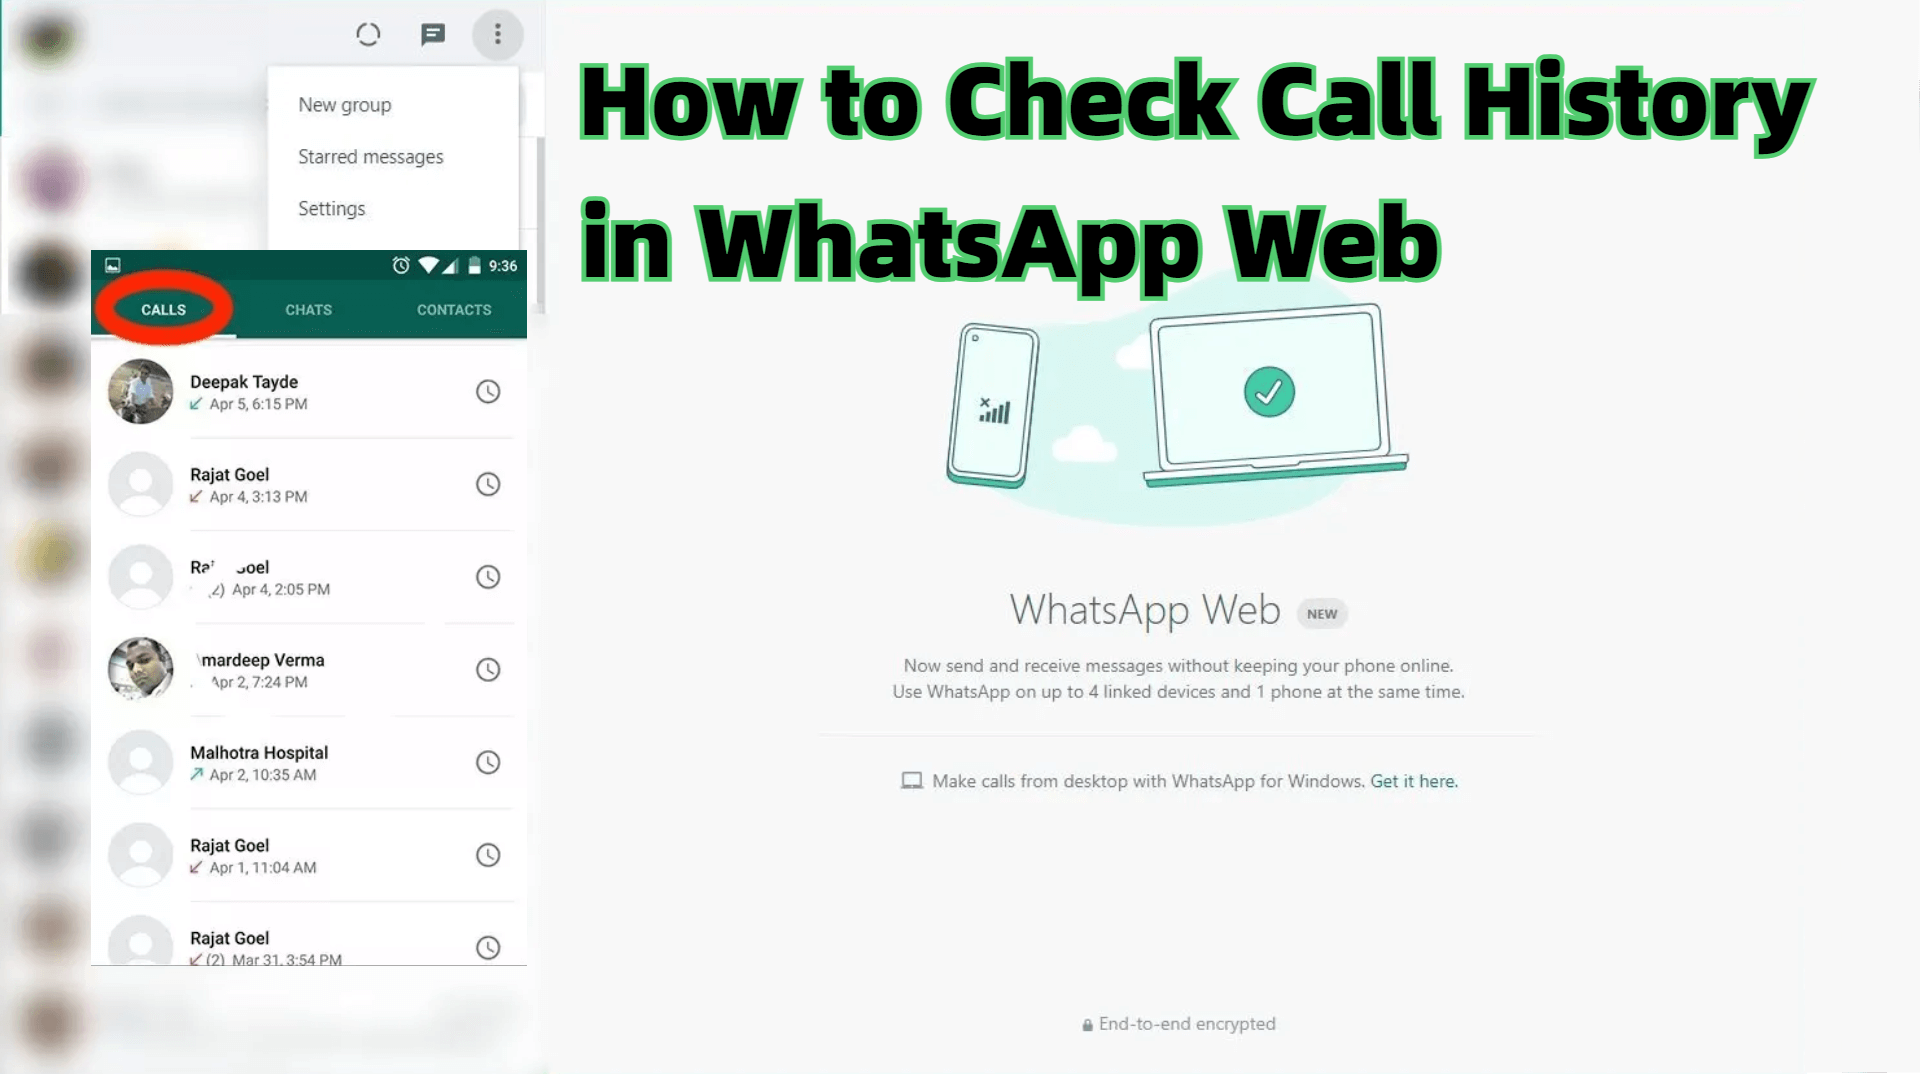 how to check call history in whatsapp web